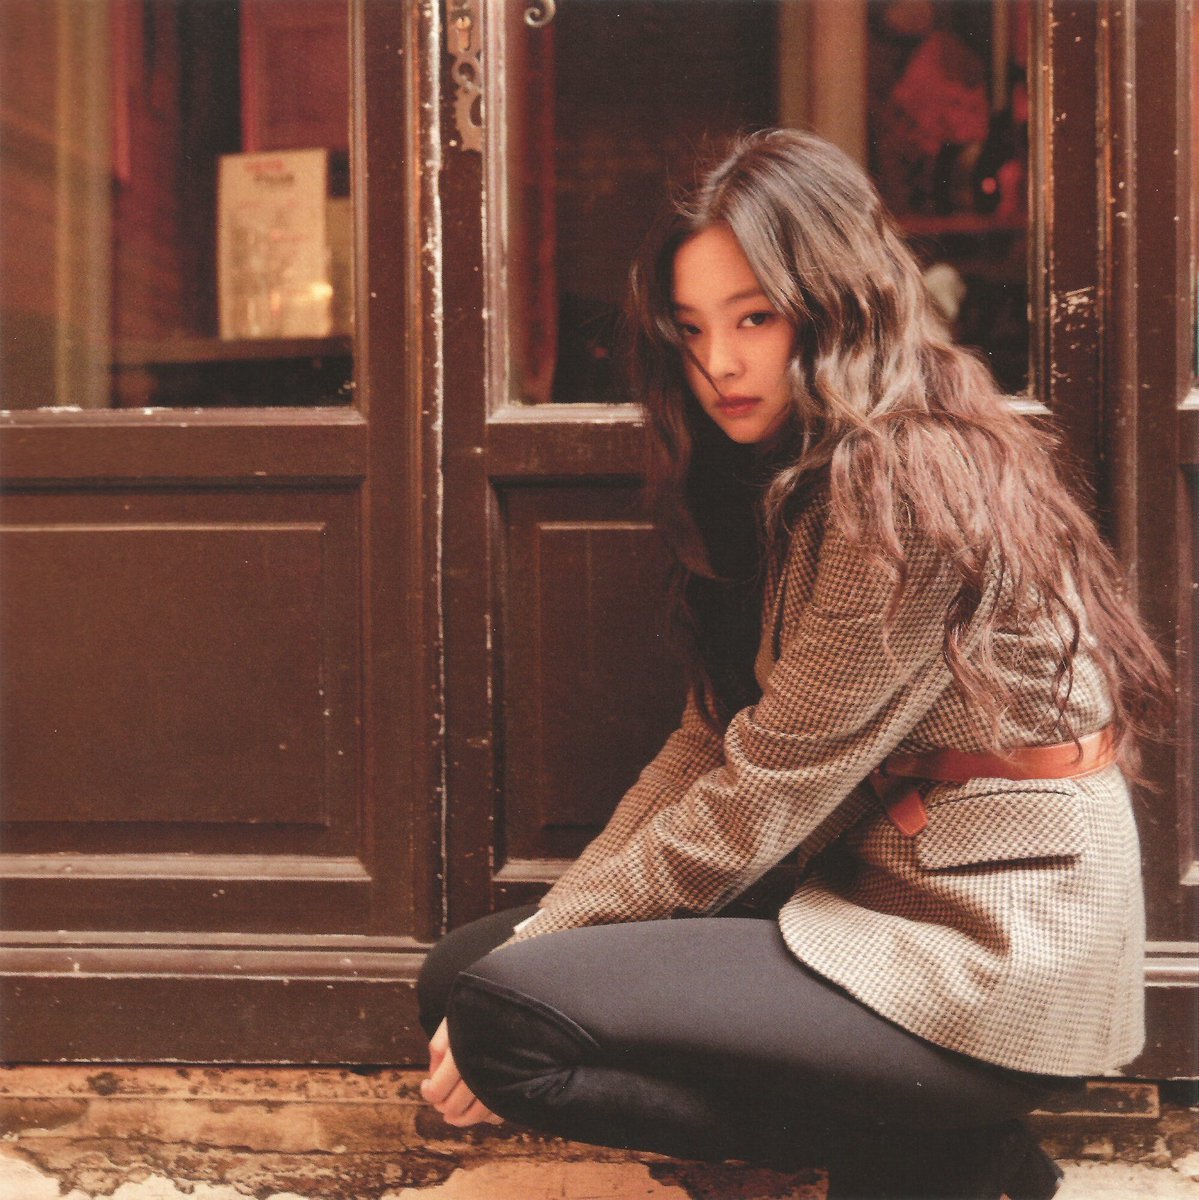 "People ask, 'I want to do this, but I lack confidence. What should I do?' Just by having the desire to do something is a beginning. From there, find what you can do well & if you enjoy the process, then won't that be enough? Don't blame yourself, find solace in you" -  #JENNIE